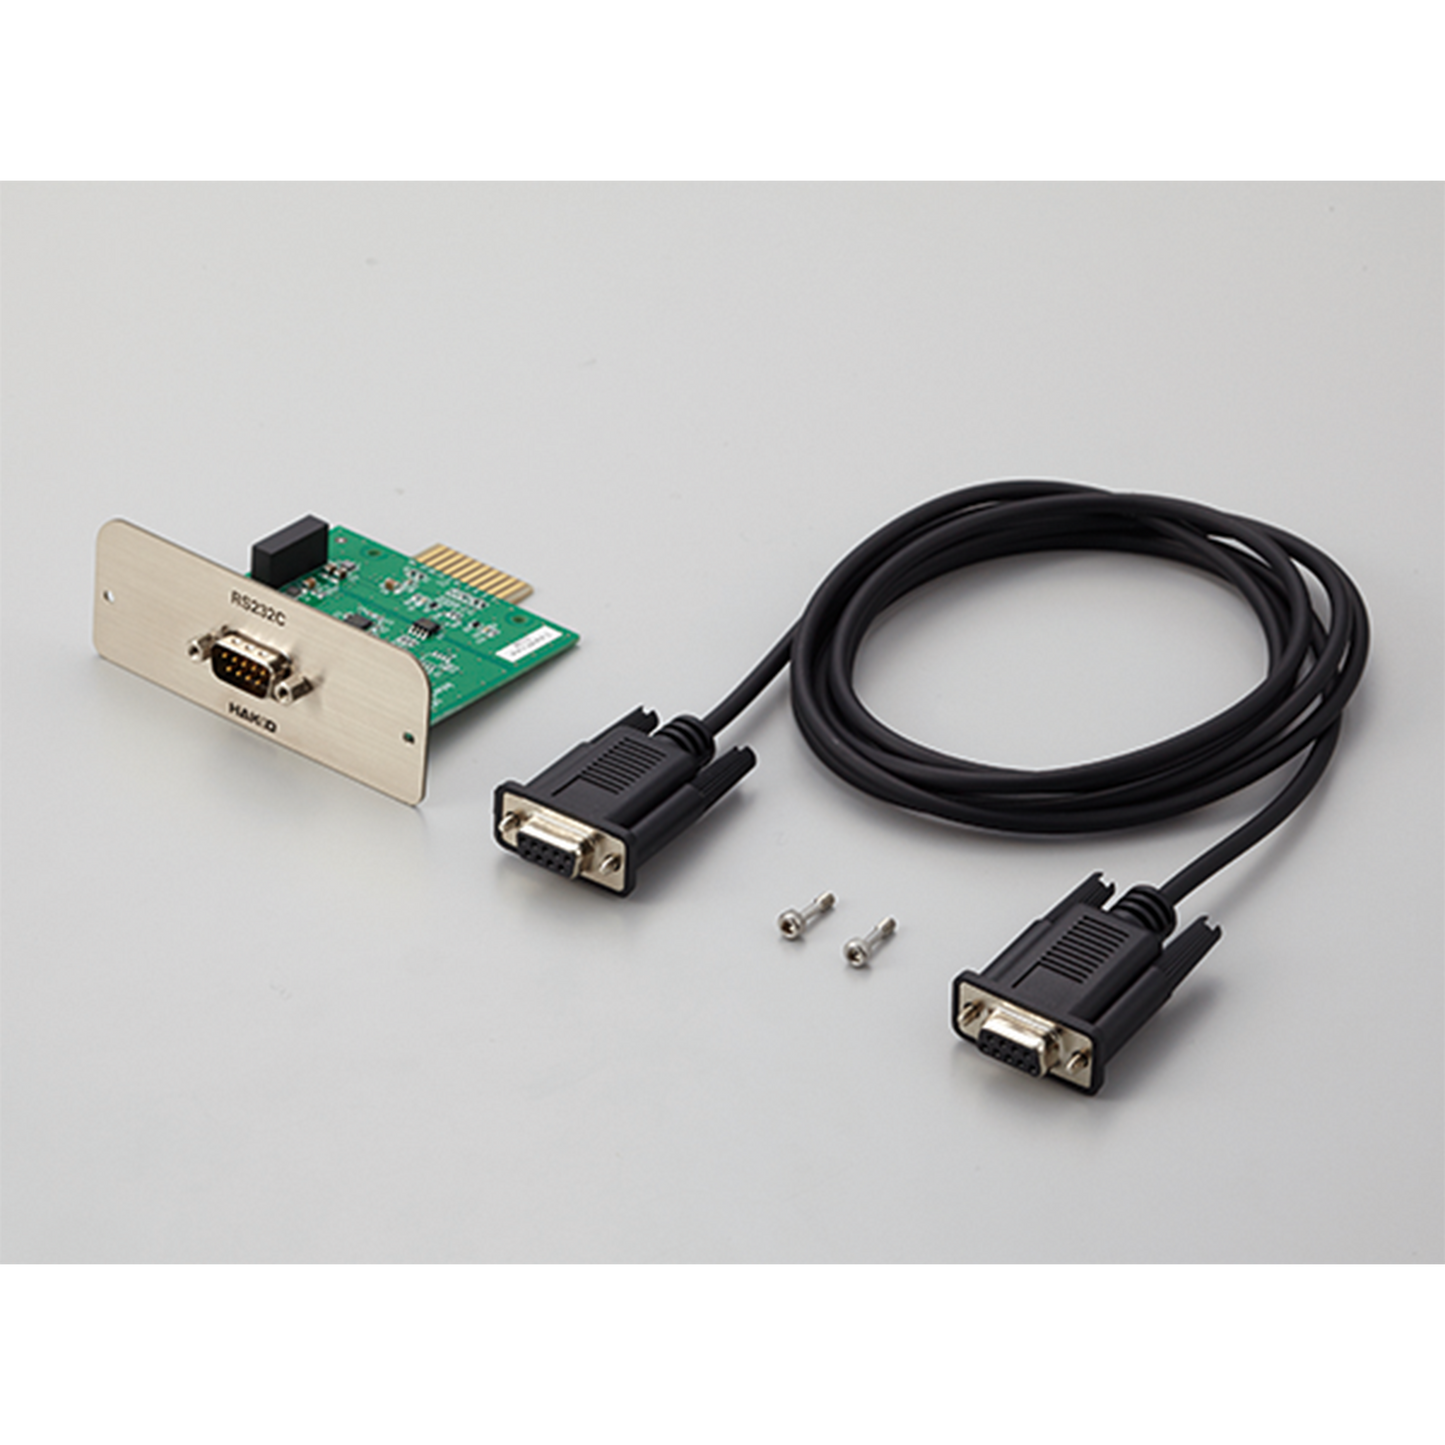 Hakko Products_ B5211 Interface card RS232C type with cable_ Soldering Accessories_ Hakko Products